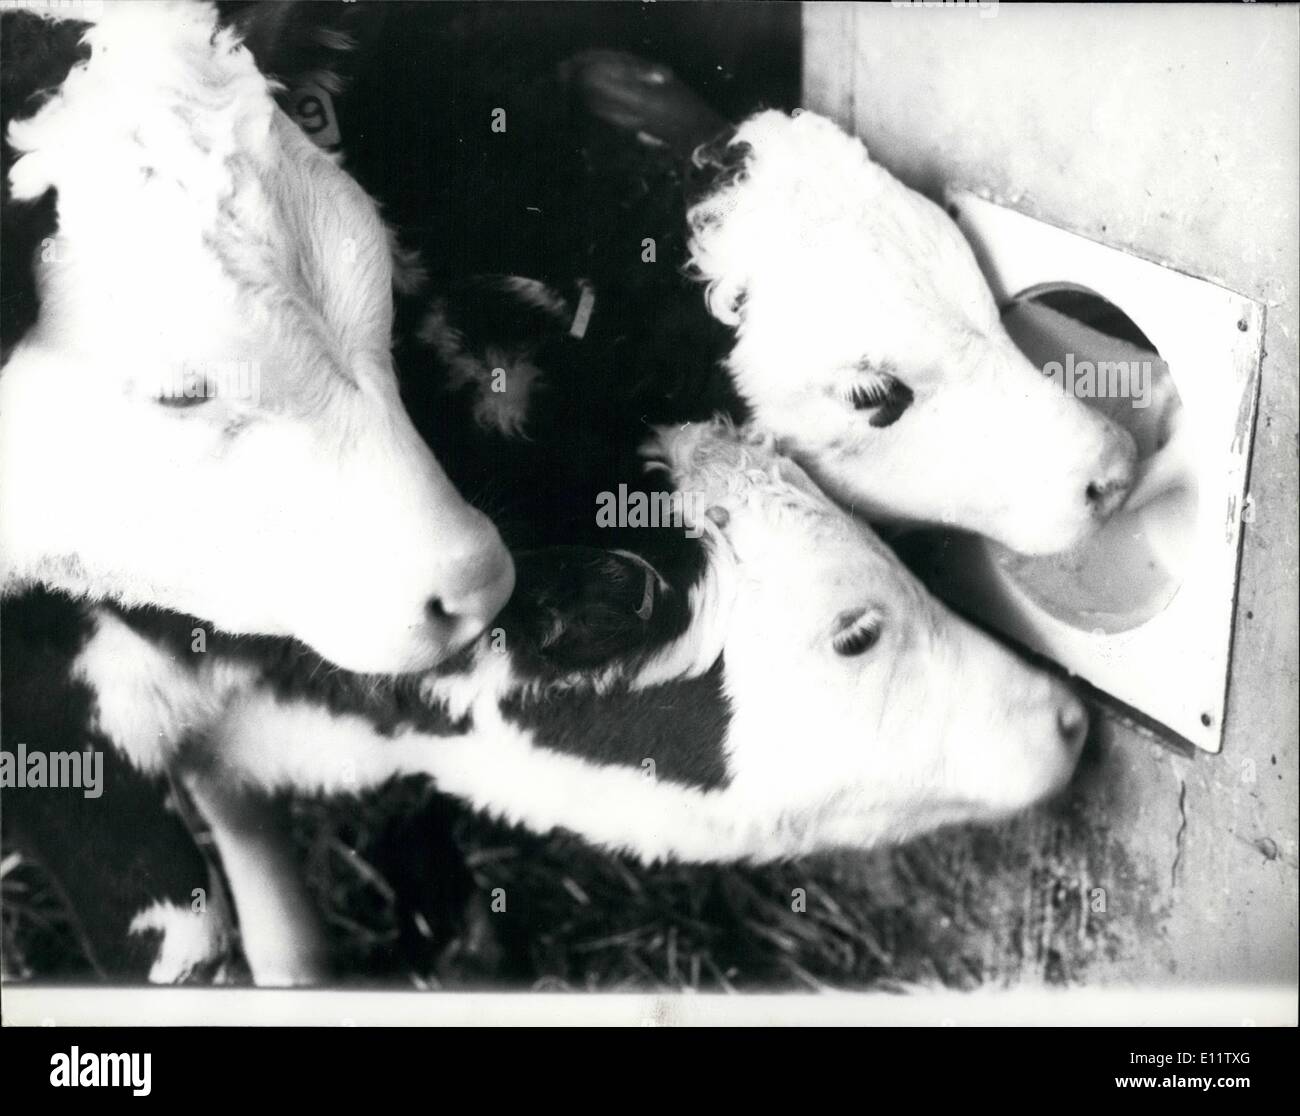 Apr. 04, 1980 - Revolutionary Welfare Veal System: Animal lovers can happily eat veal in future. The UK veal industry has been revolutionized by a new welfare production system developed by Quantook Veal, the largest veal producers in the country and part of the Voles group. Quantook with their associated company, Bellinger Brothere, specialists veal wholesalers, provide 90% of the retail veal in the UK. ''Gone are the traditional cramped veal crates and with them the reason for consumer resistance to veal buying' said Mr Stock Photo